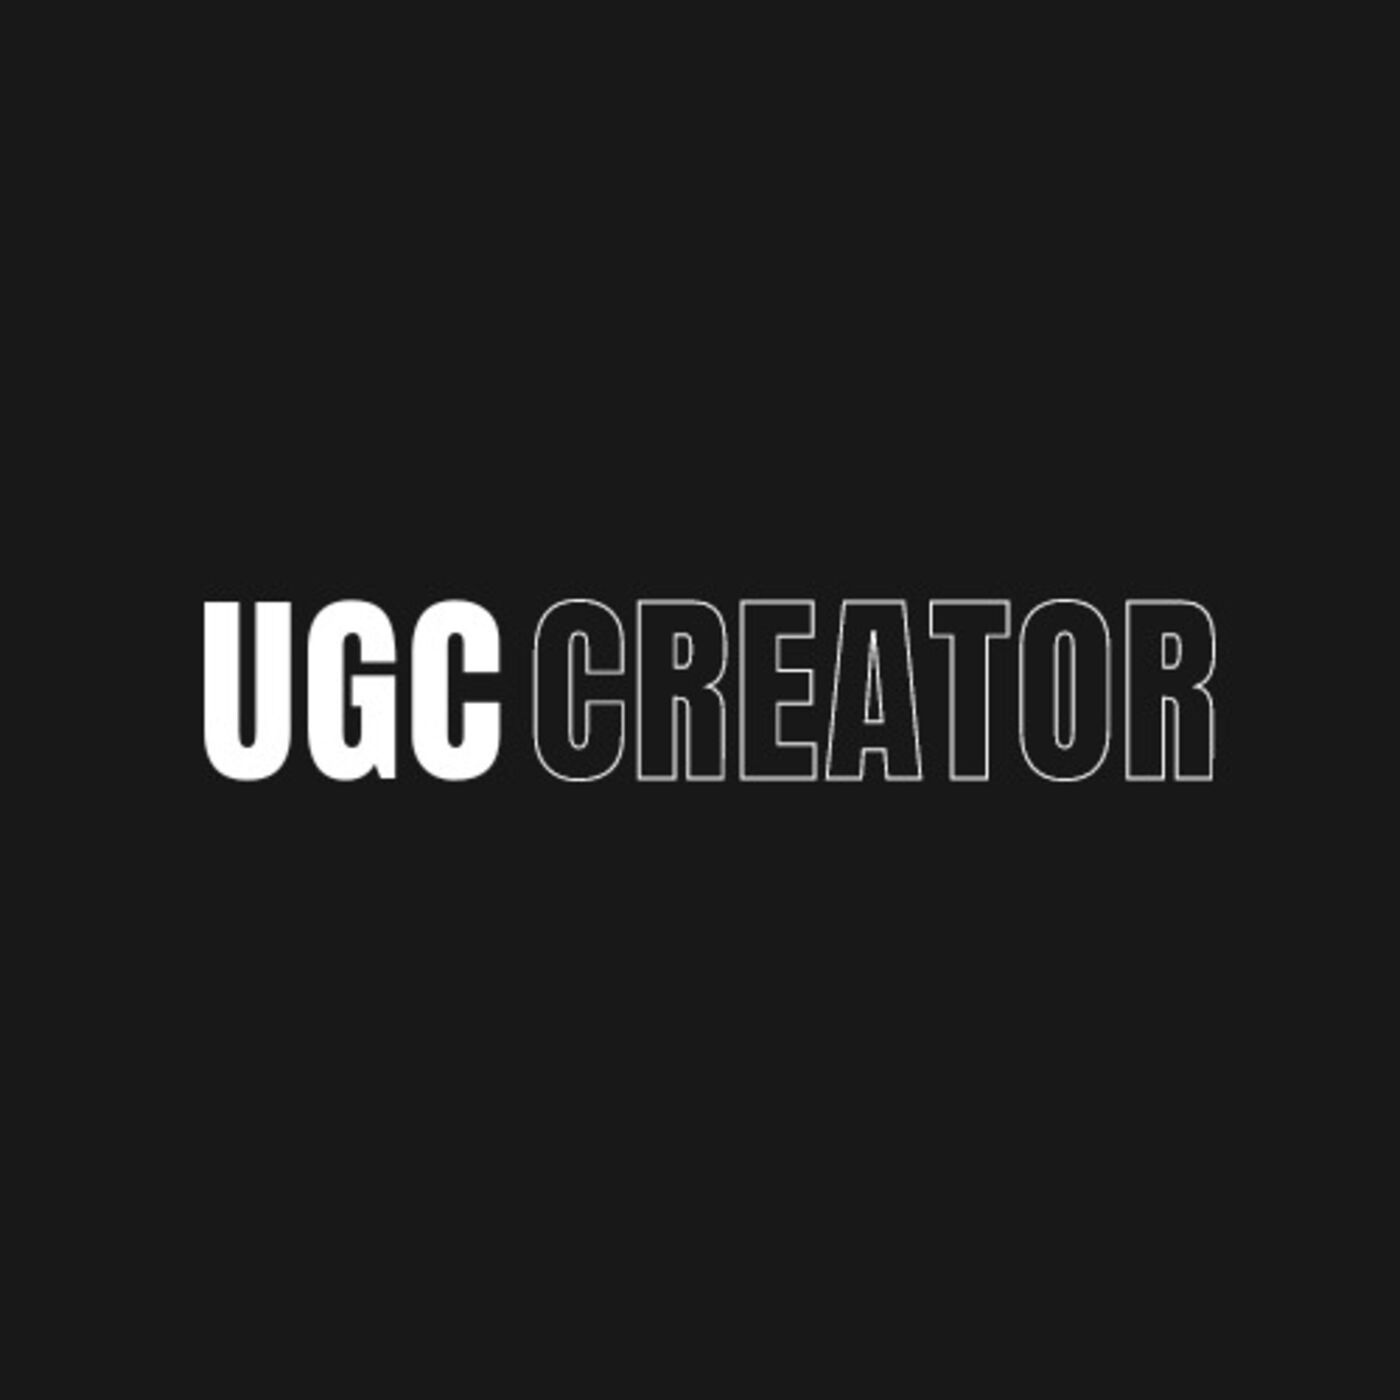 vctr's digital nomad journey into UGC Curation & Blogging (again) by vctr